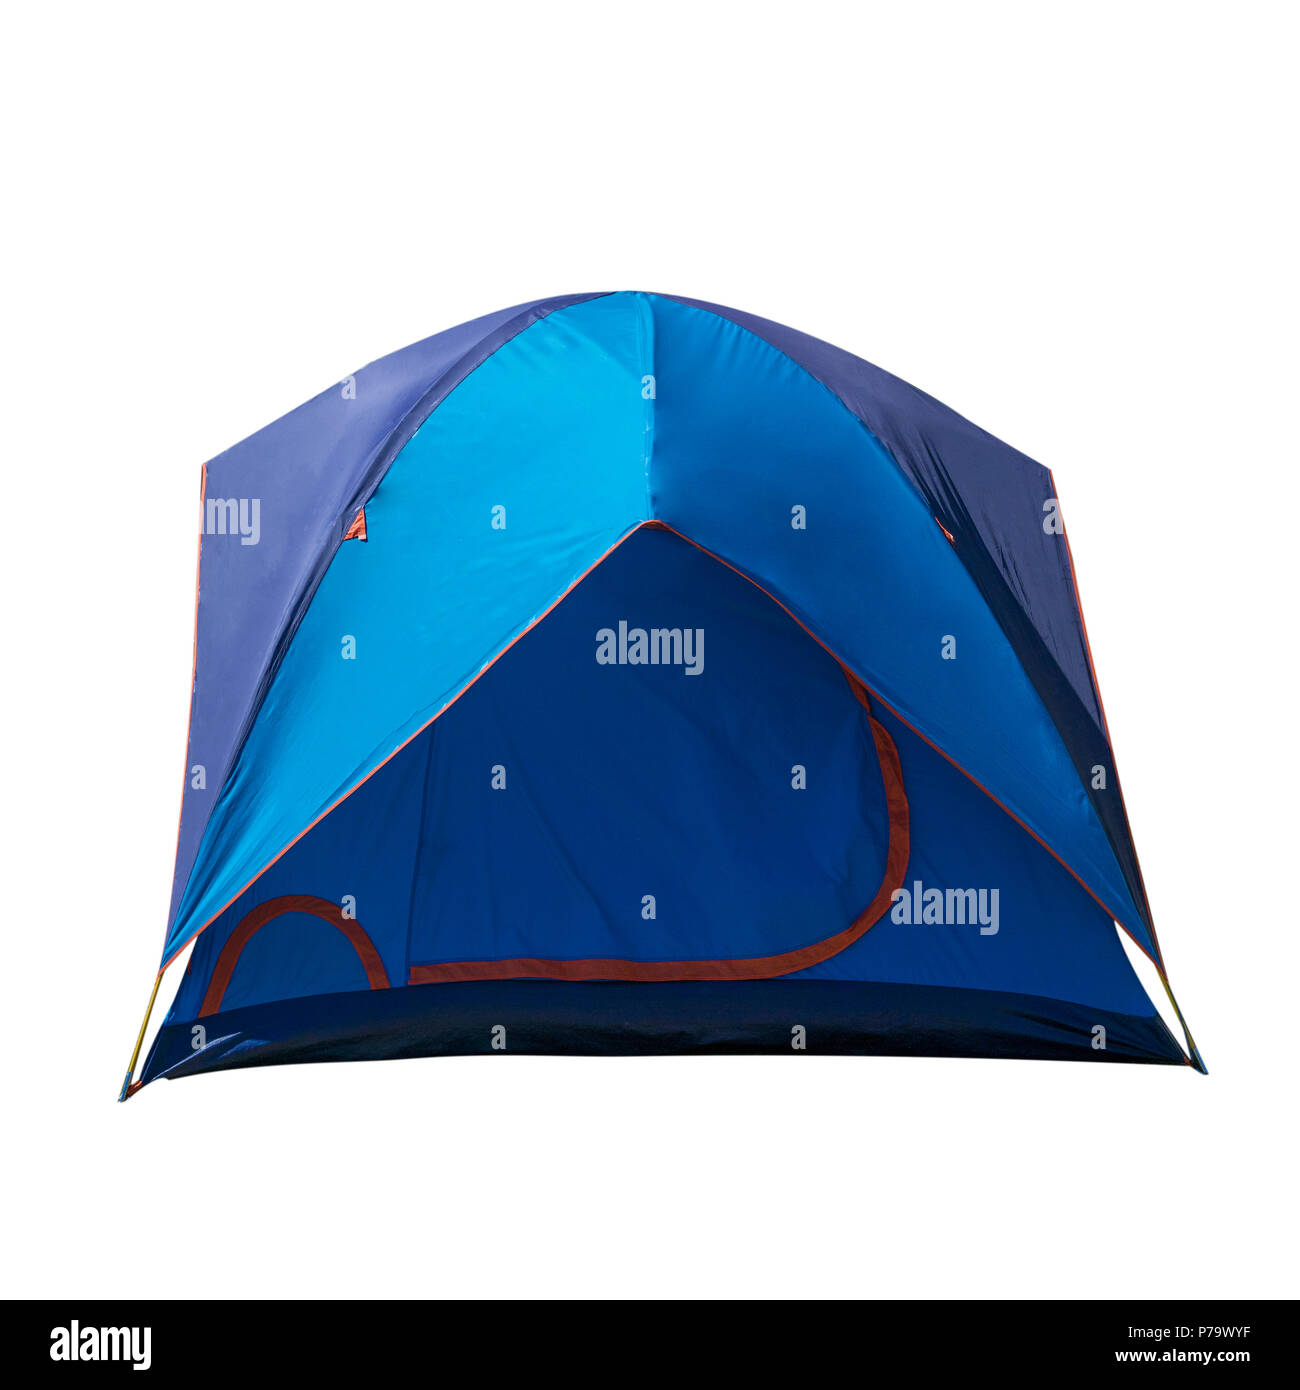 Blue camping tent isolated on white background, Dome tent, Camping Equipment Stock Photo